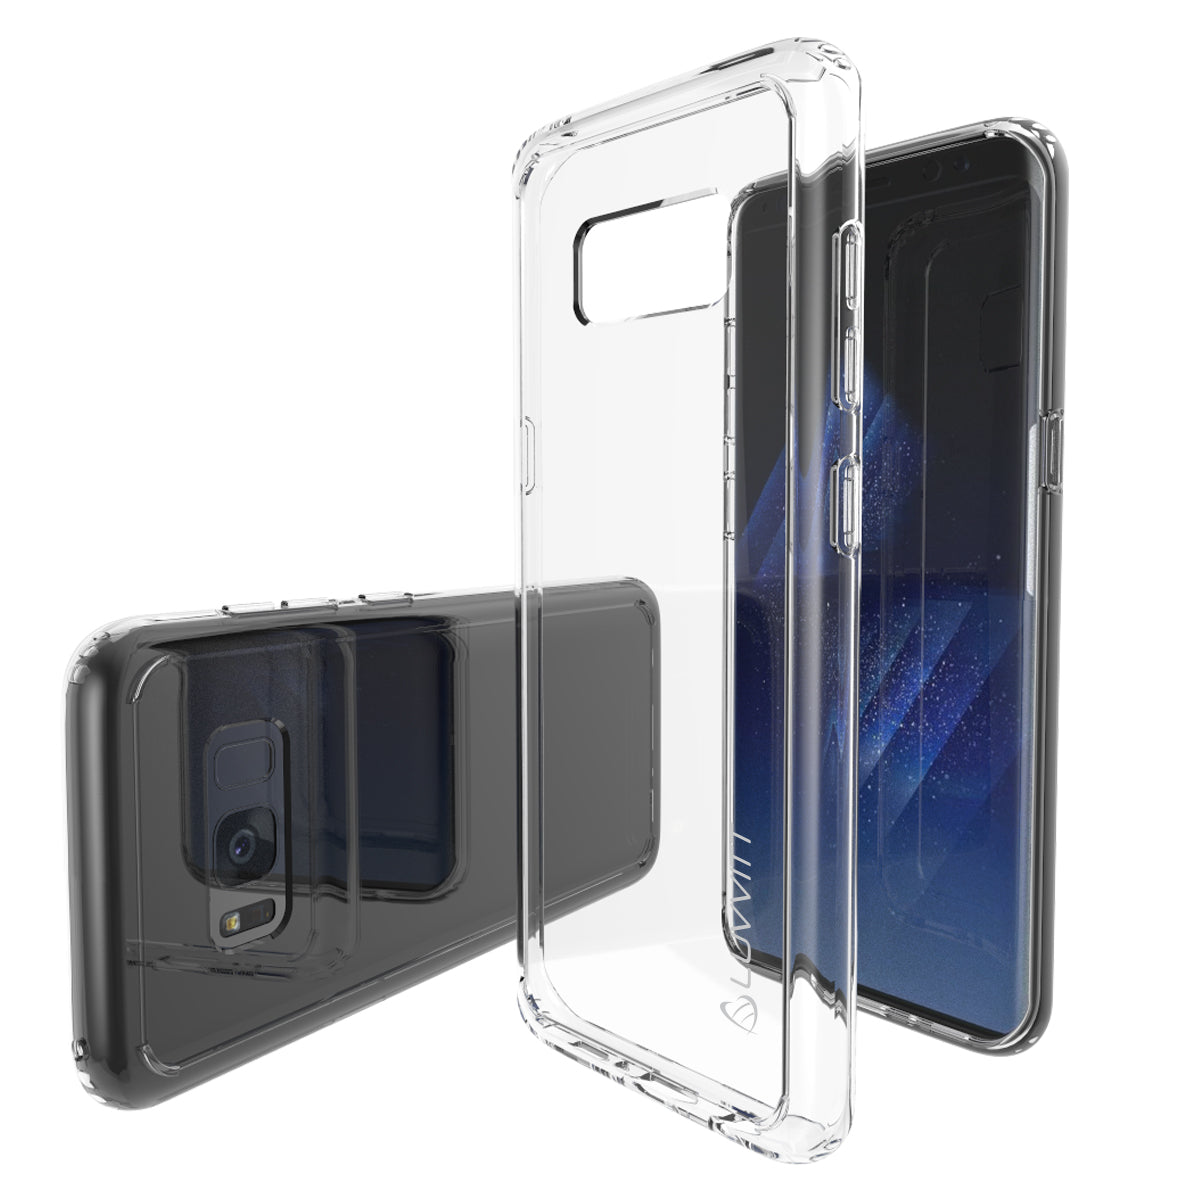 LUVVITT CLEAR VIEW Case for Galaxy S8 - Clear